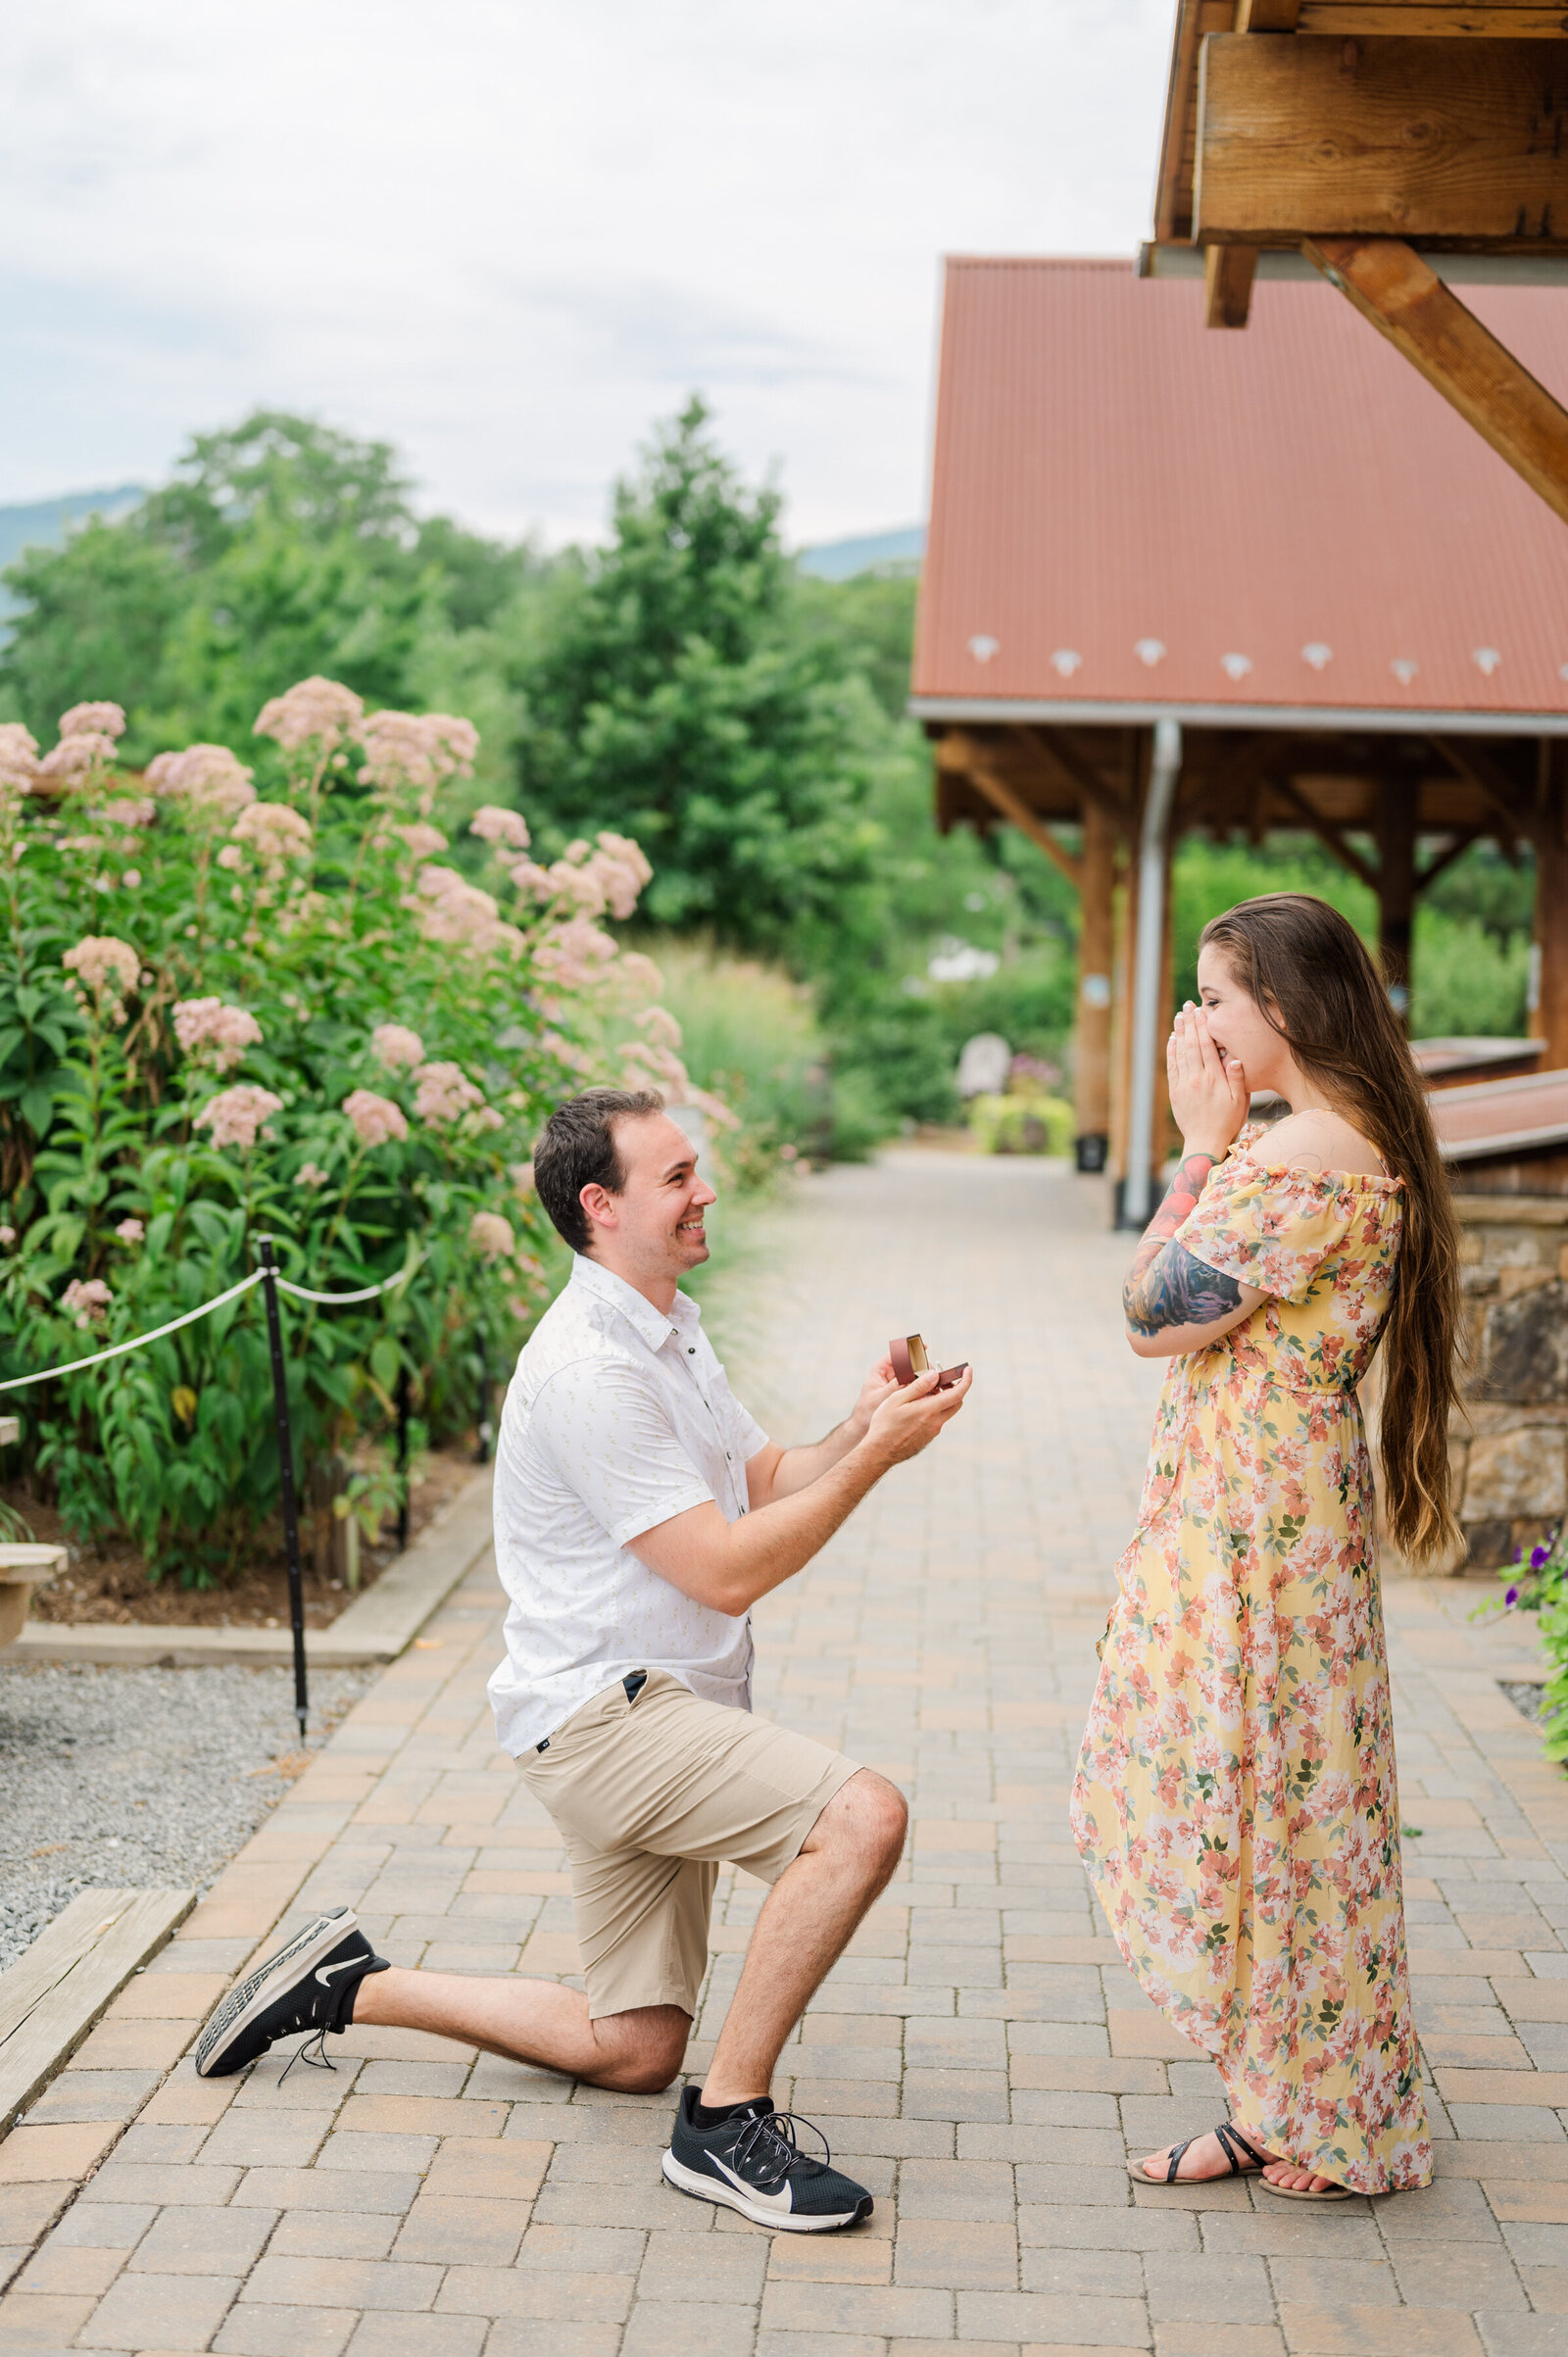 Man is down on one knee proposing to a woman at Devil's Backbone Brewery in Virginia